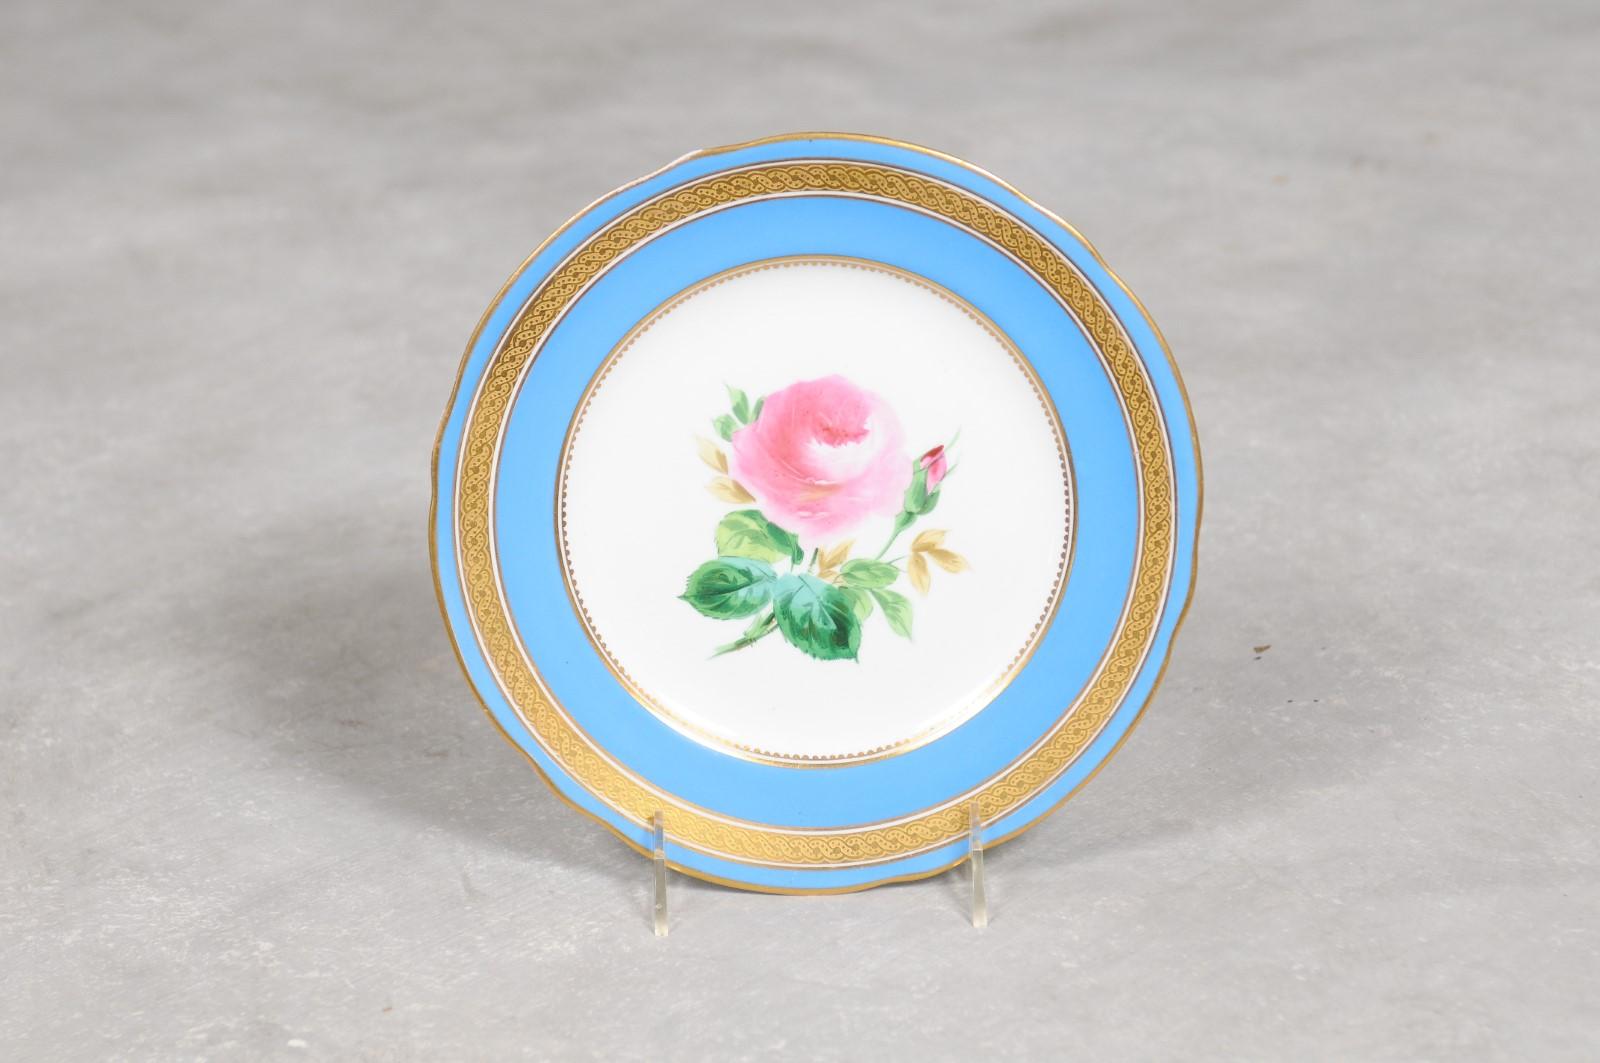 An English turquoise and white faience dessert plate from the 19th century, with painted pink rose and gilt border. Created in England during the 19th century, this dessert plate features a turquoise border accented with a gilt trim, surrounding a